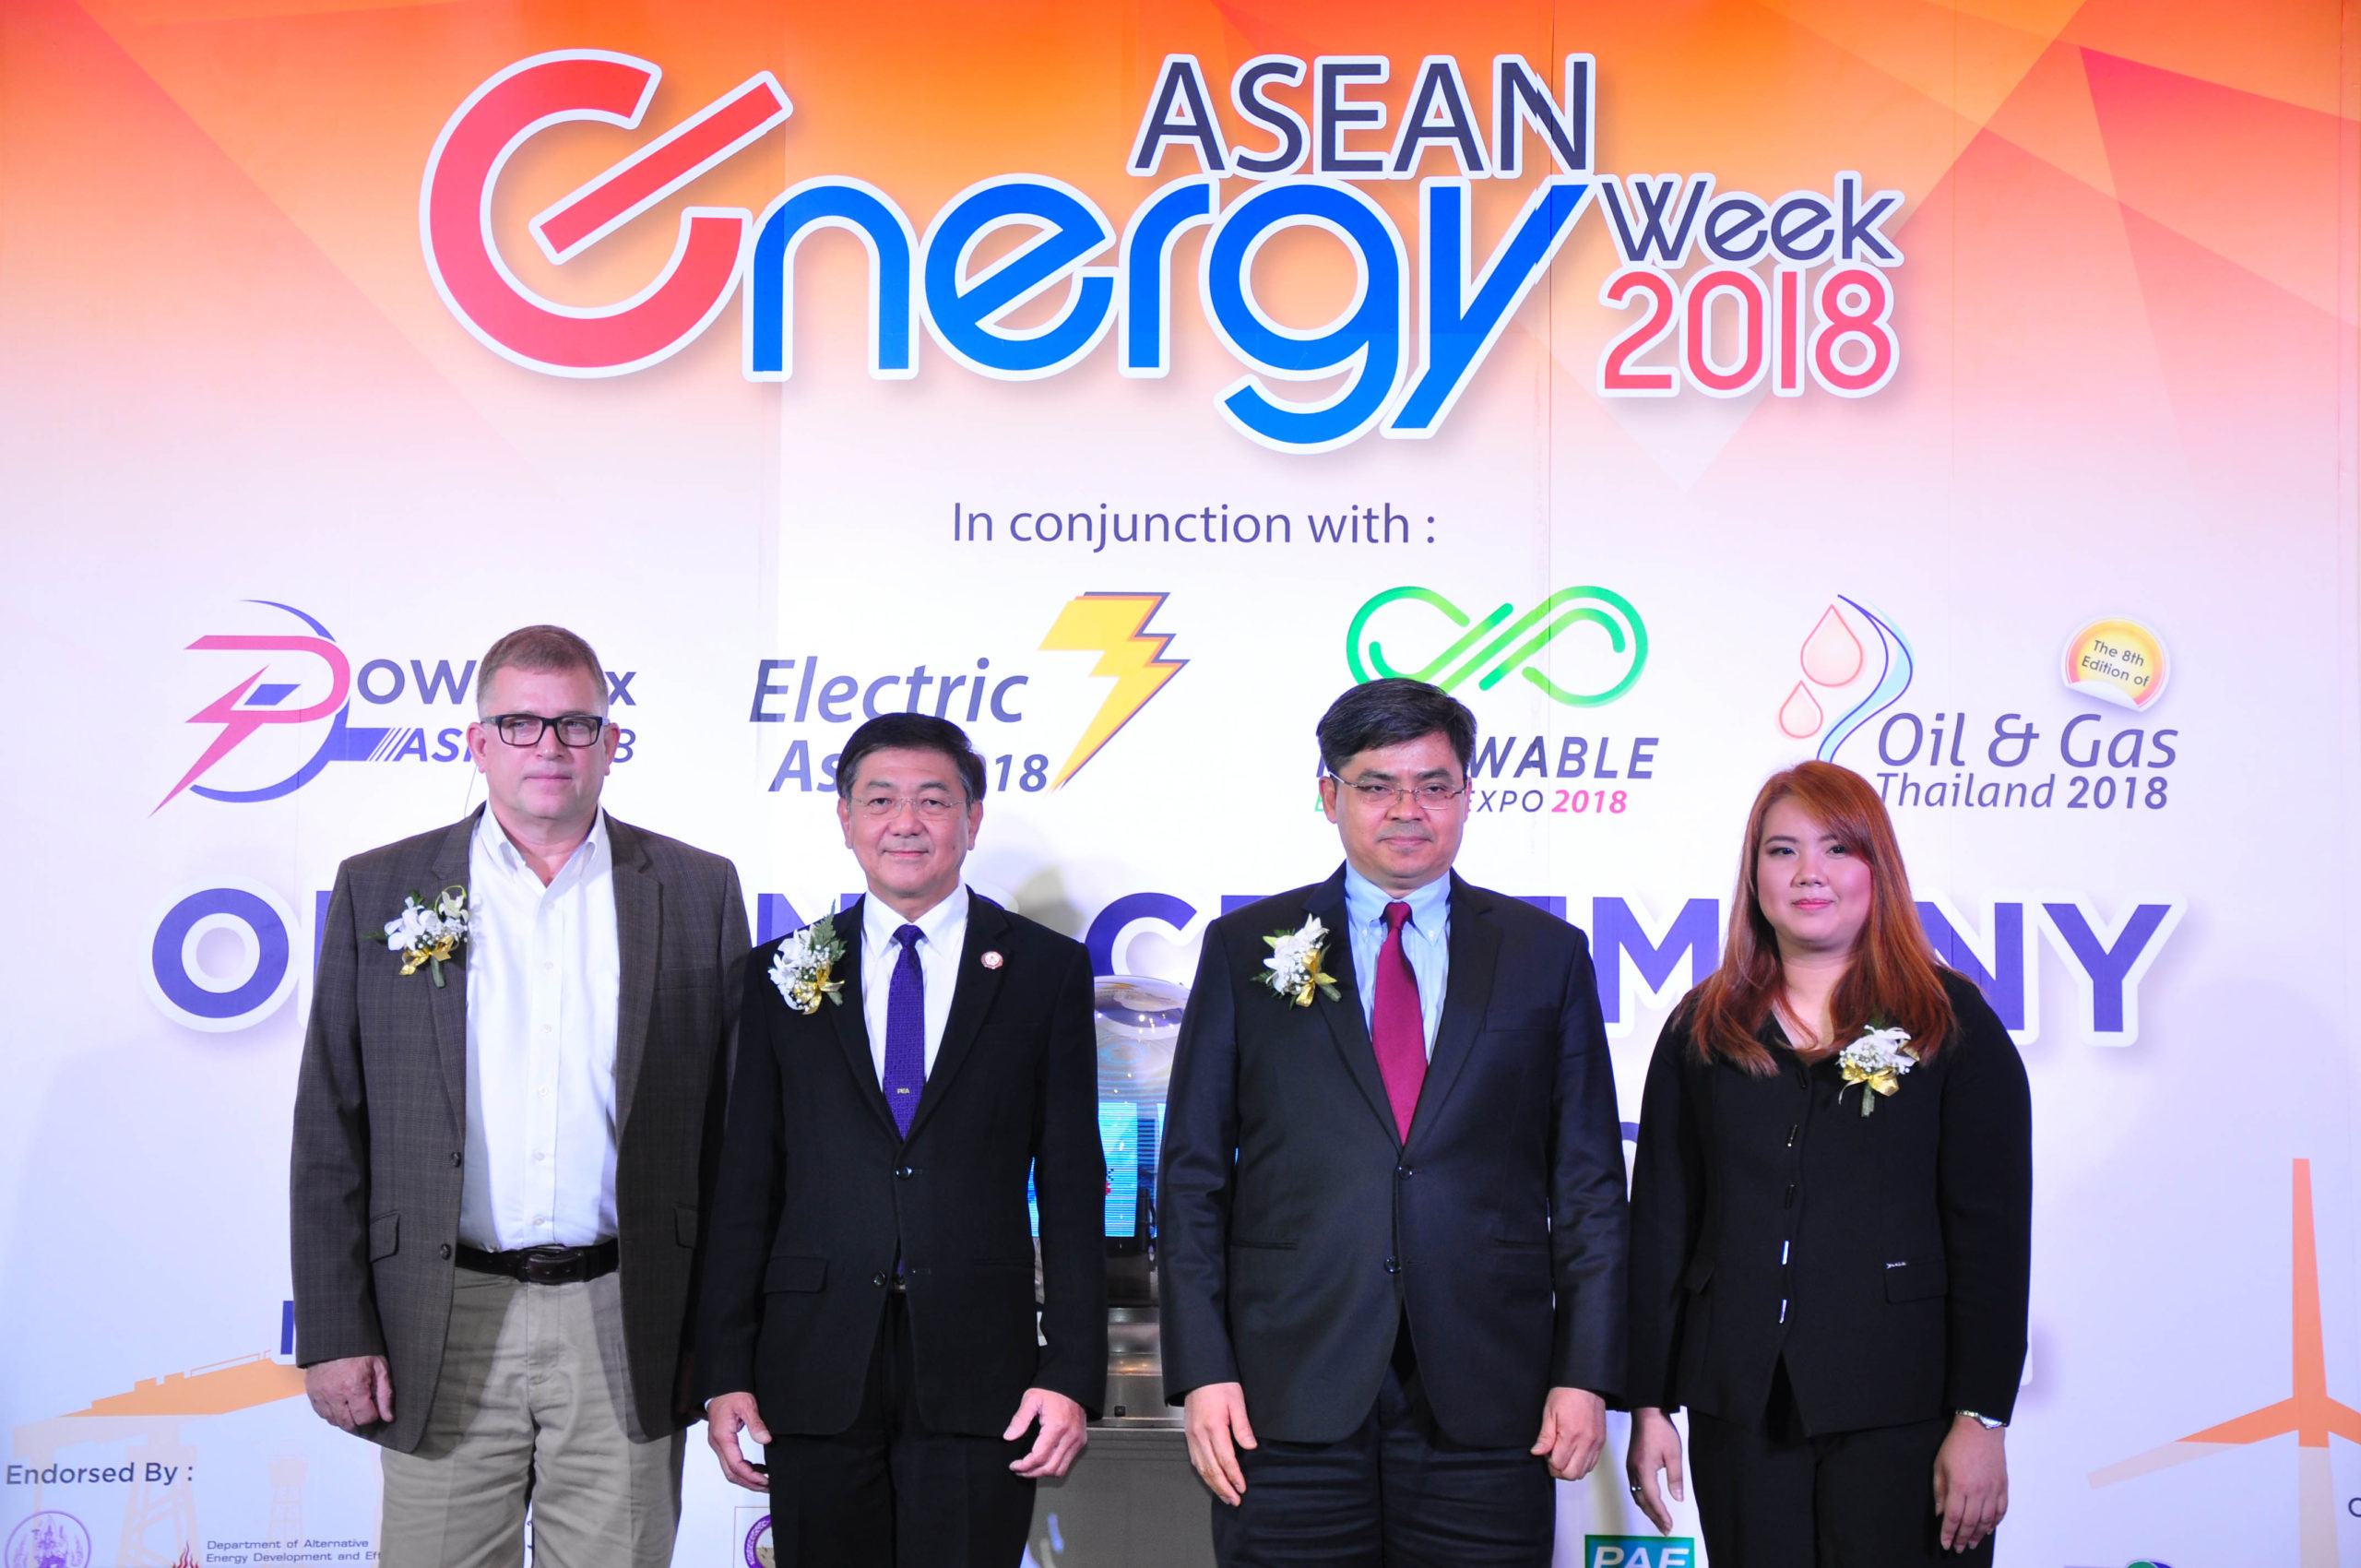 ASEAN Energy Week 2018 Brought Together a Leader in the Field Of Energy Technology